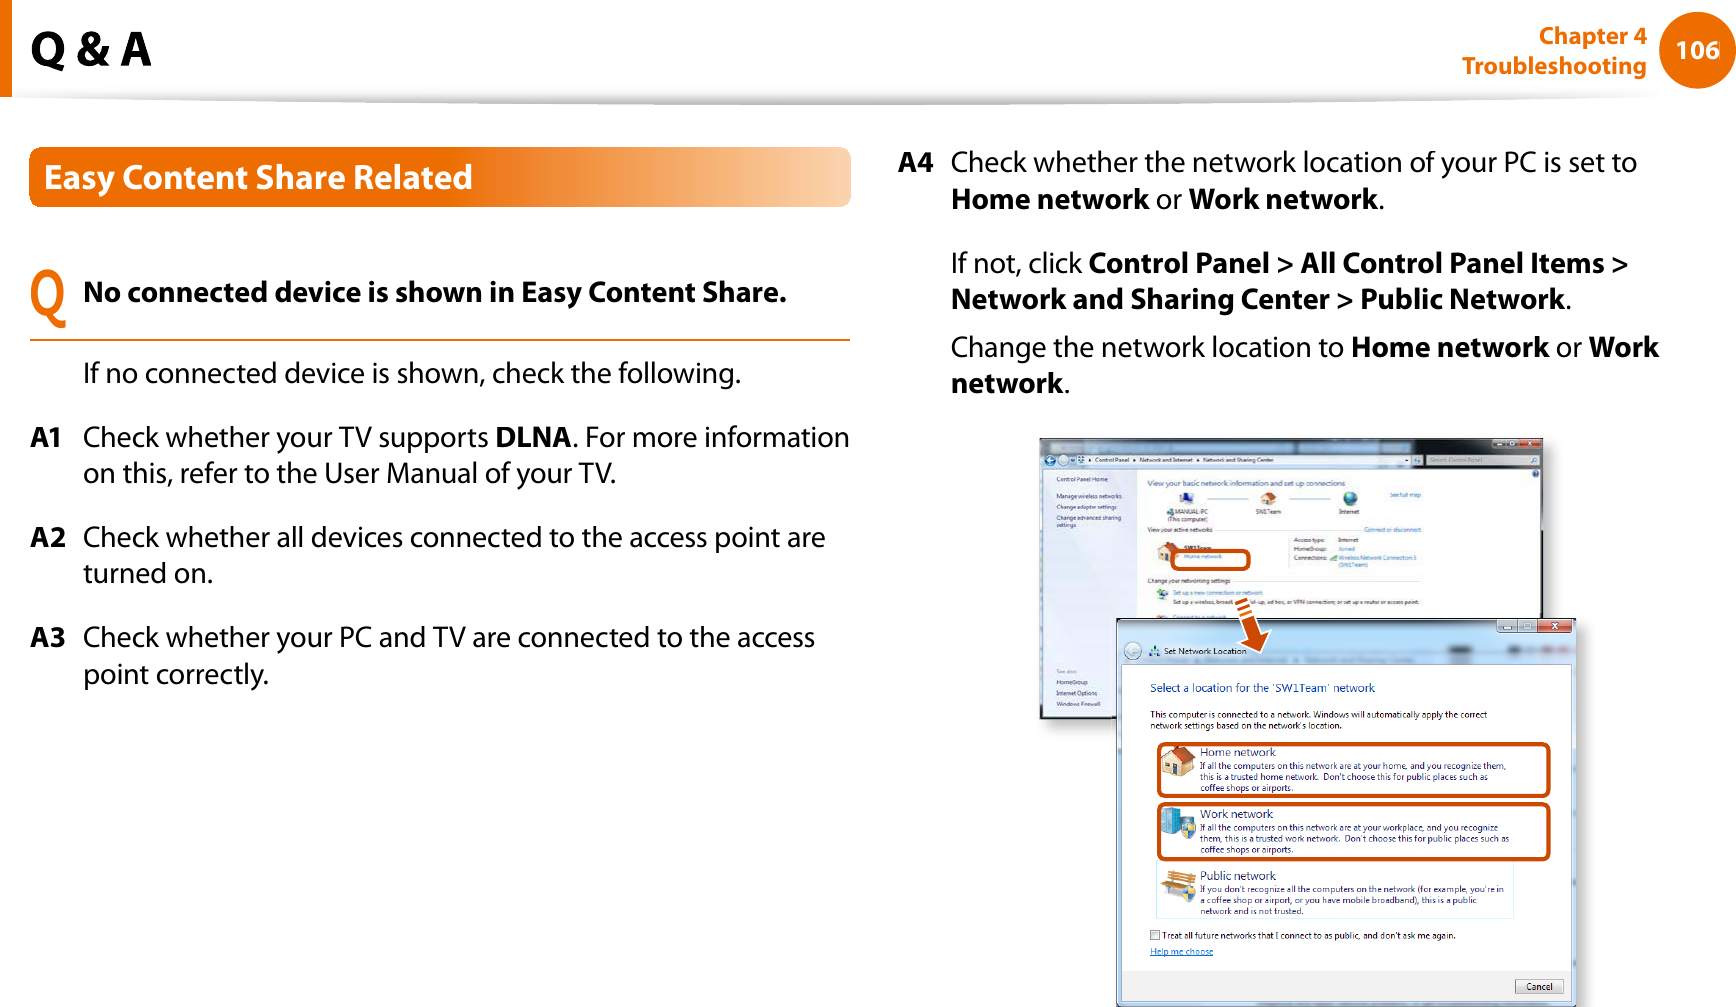 106Chapter 4TroubleshootingEasy Content Share RelatedQNo connected device is shown in Easy Content Share.If no connected device is shown, check the following.A1Check whether your TV supportsDLNA. For more informationon this, refer to the User Manual of your TV.A2Check whether all devices connected to the access point areturned on.A3Check whether your PC and TV are connected to the accesspoint correctly.A4Check whether the network location of your PC is set toHome networkorkWork network.If not, click Control Panel &gt; All Control Panel Items &gt;Network and Sharing Center &gt; Public Network.Change the network location toHome networkorkWork network.